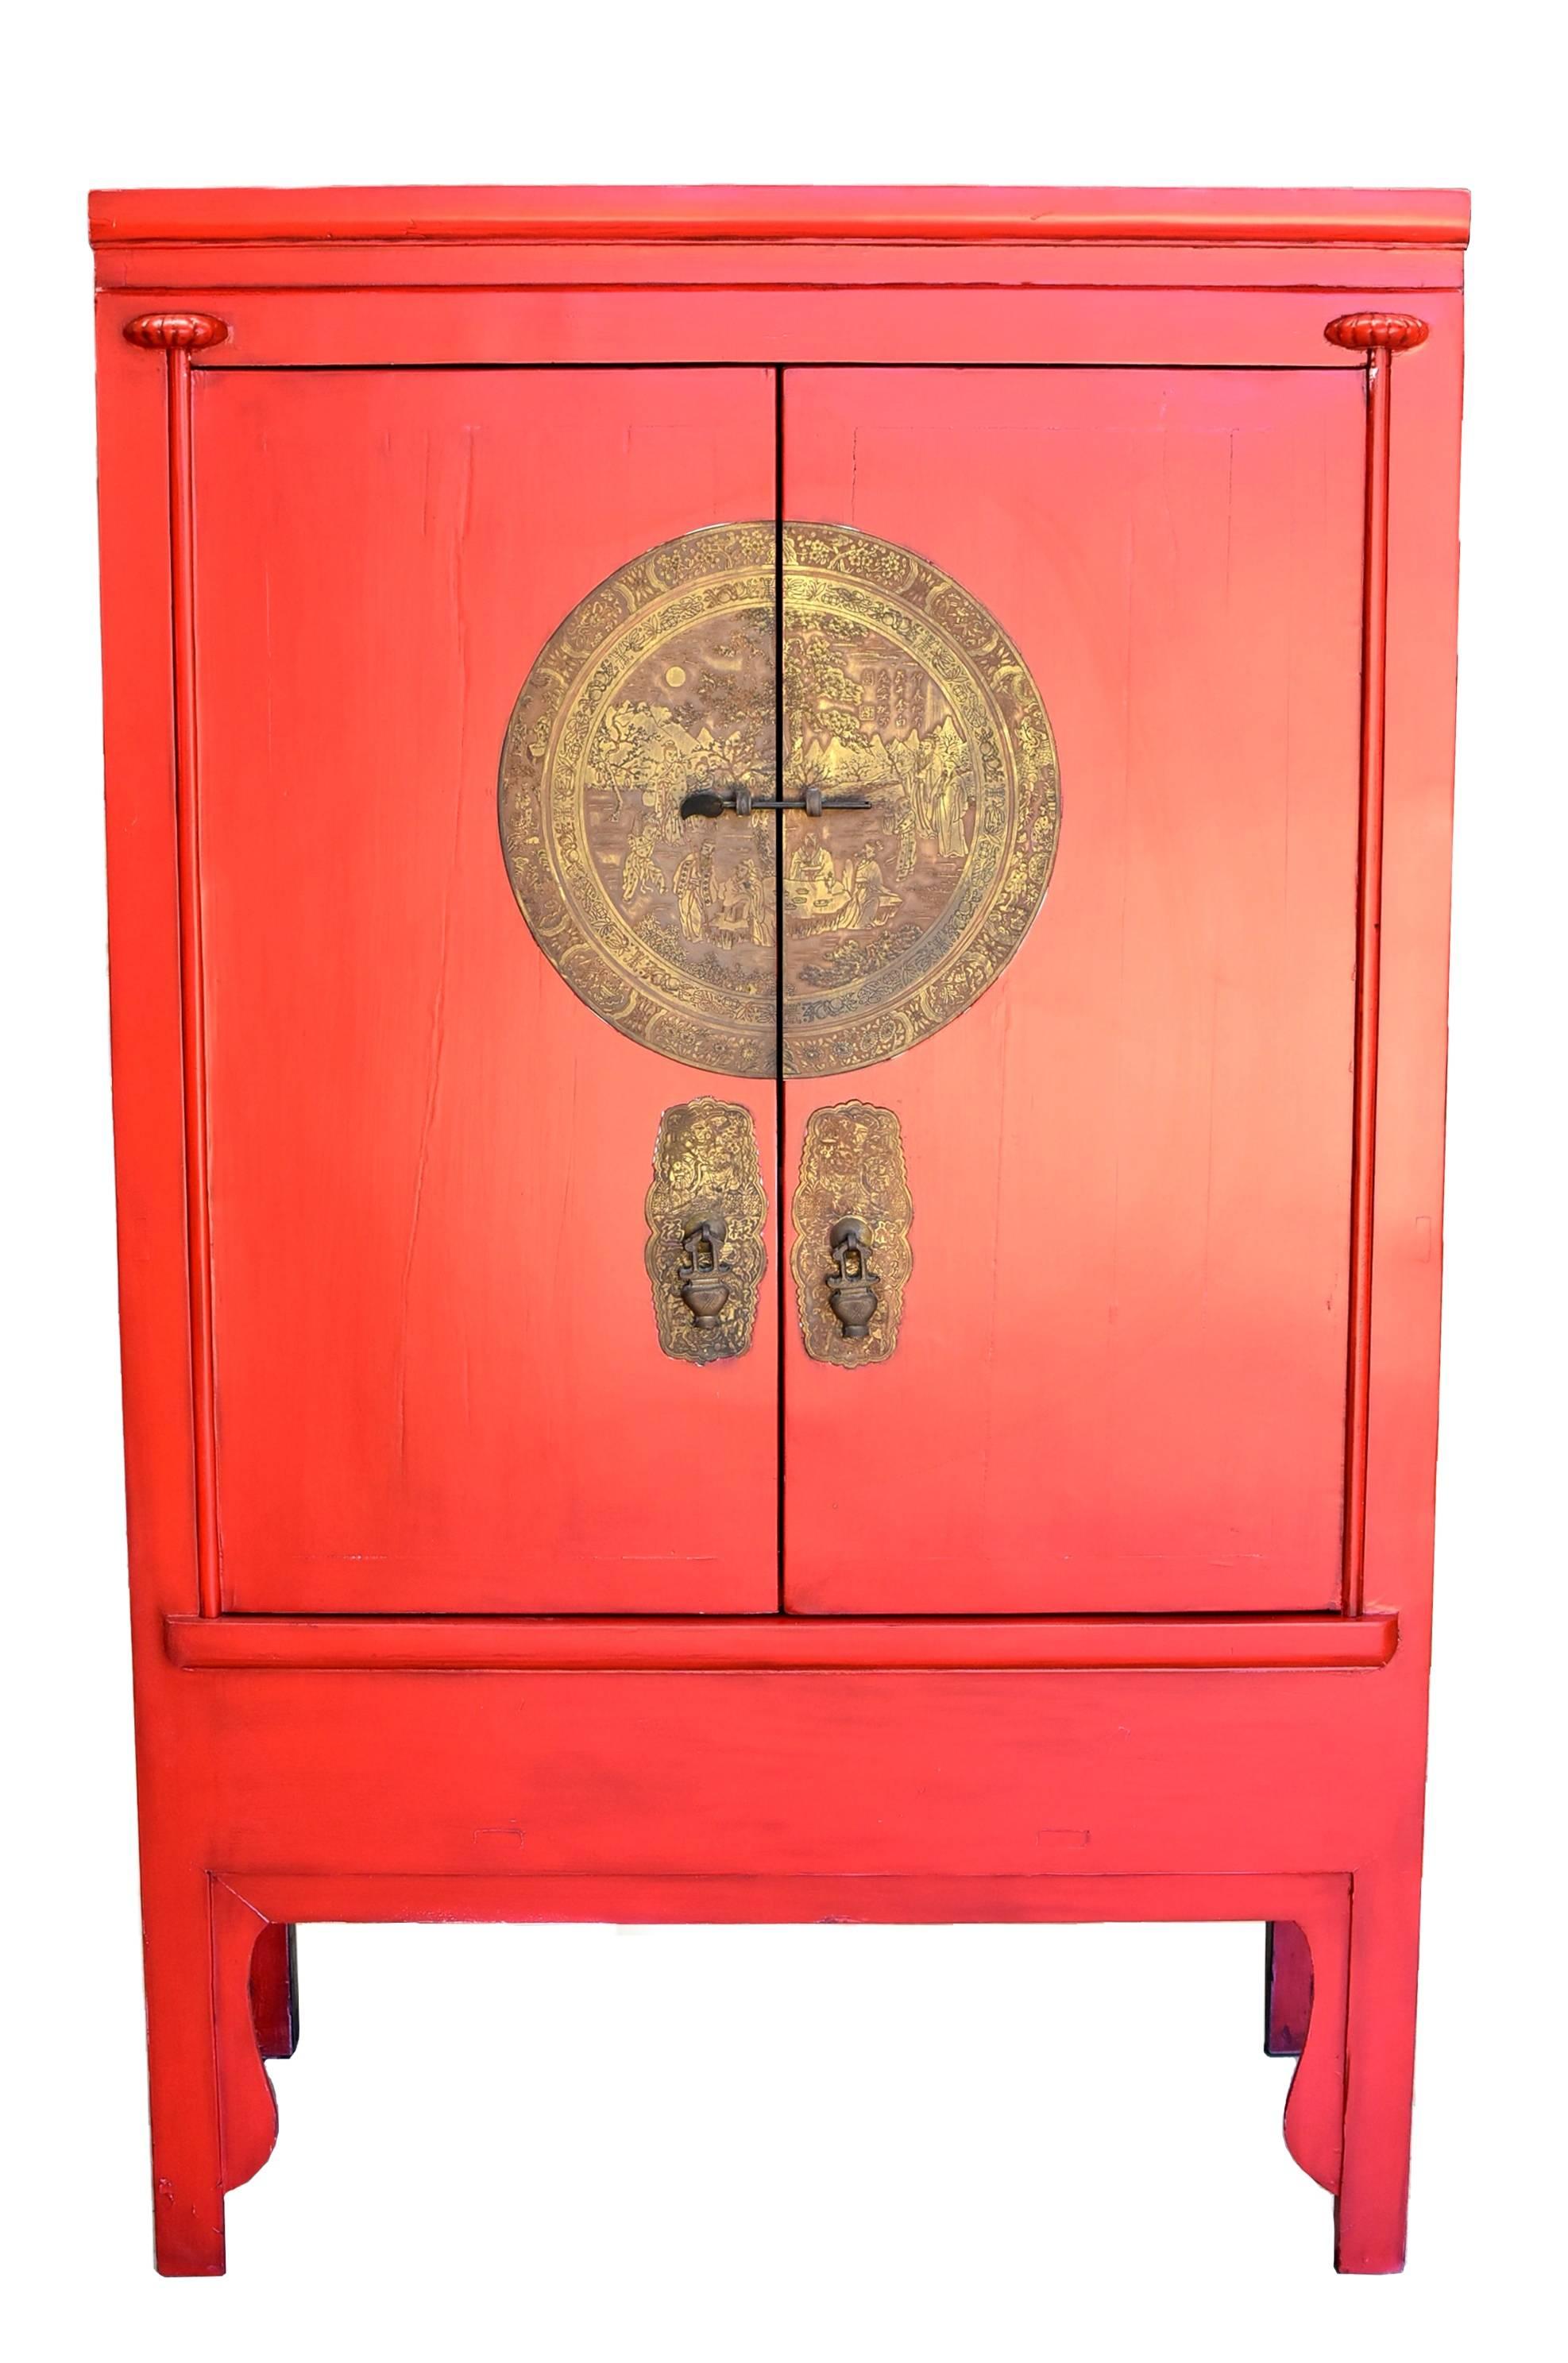 A traditional wedding cabinet from southern China. Bright red symbolizes good fortune, Golden brass medallion symbolizes perfection. Removable shelves provide flexible storage. Black and red contrast add visual drama. A Chinese classic, this piece